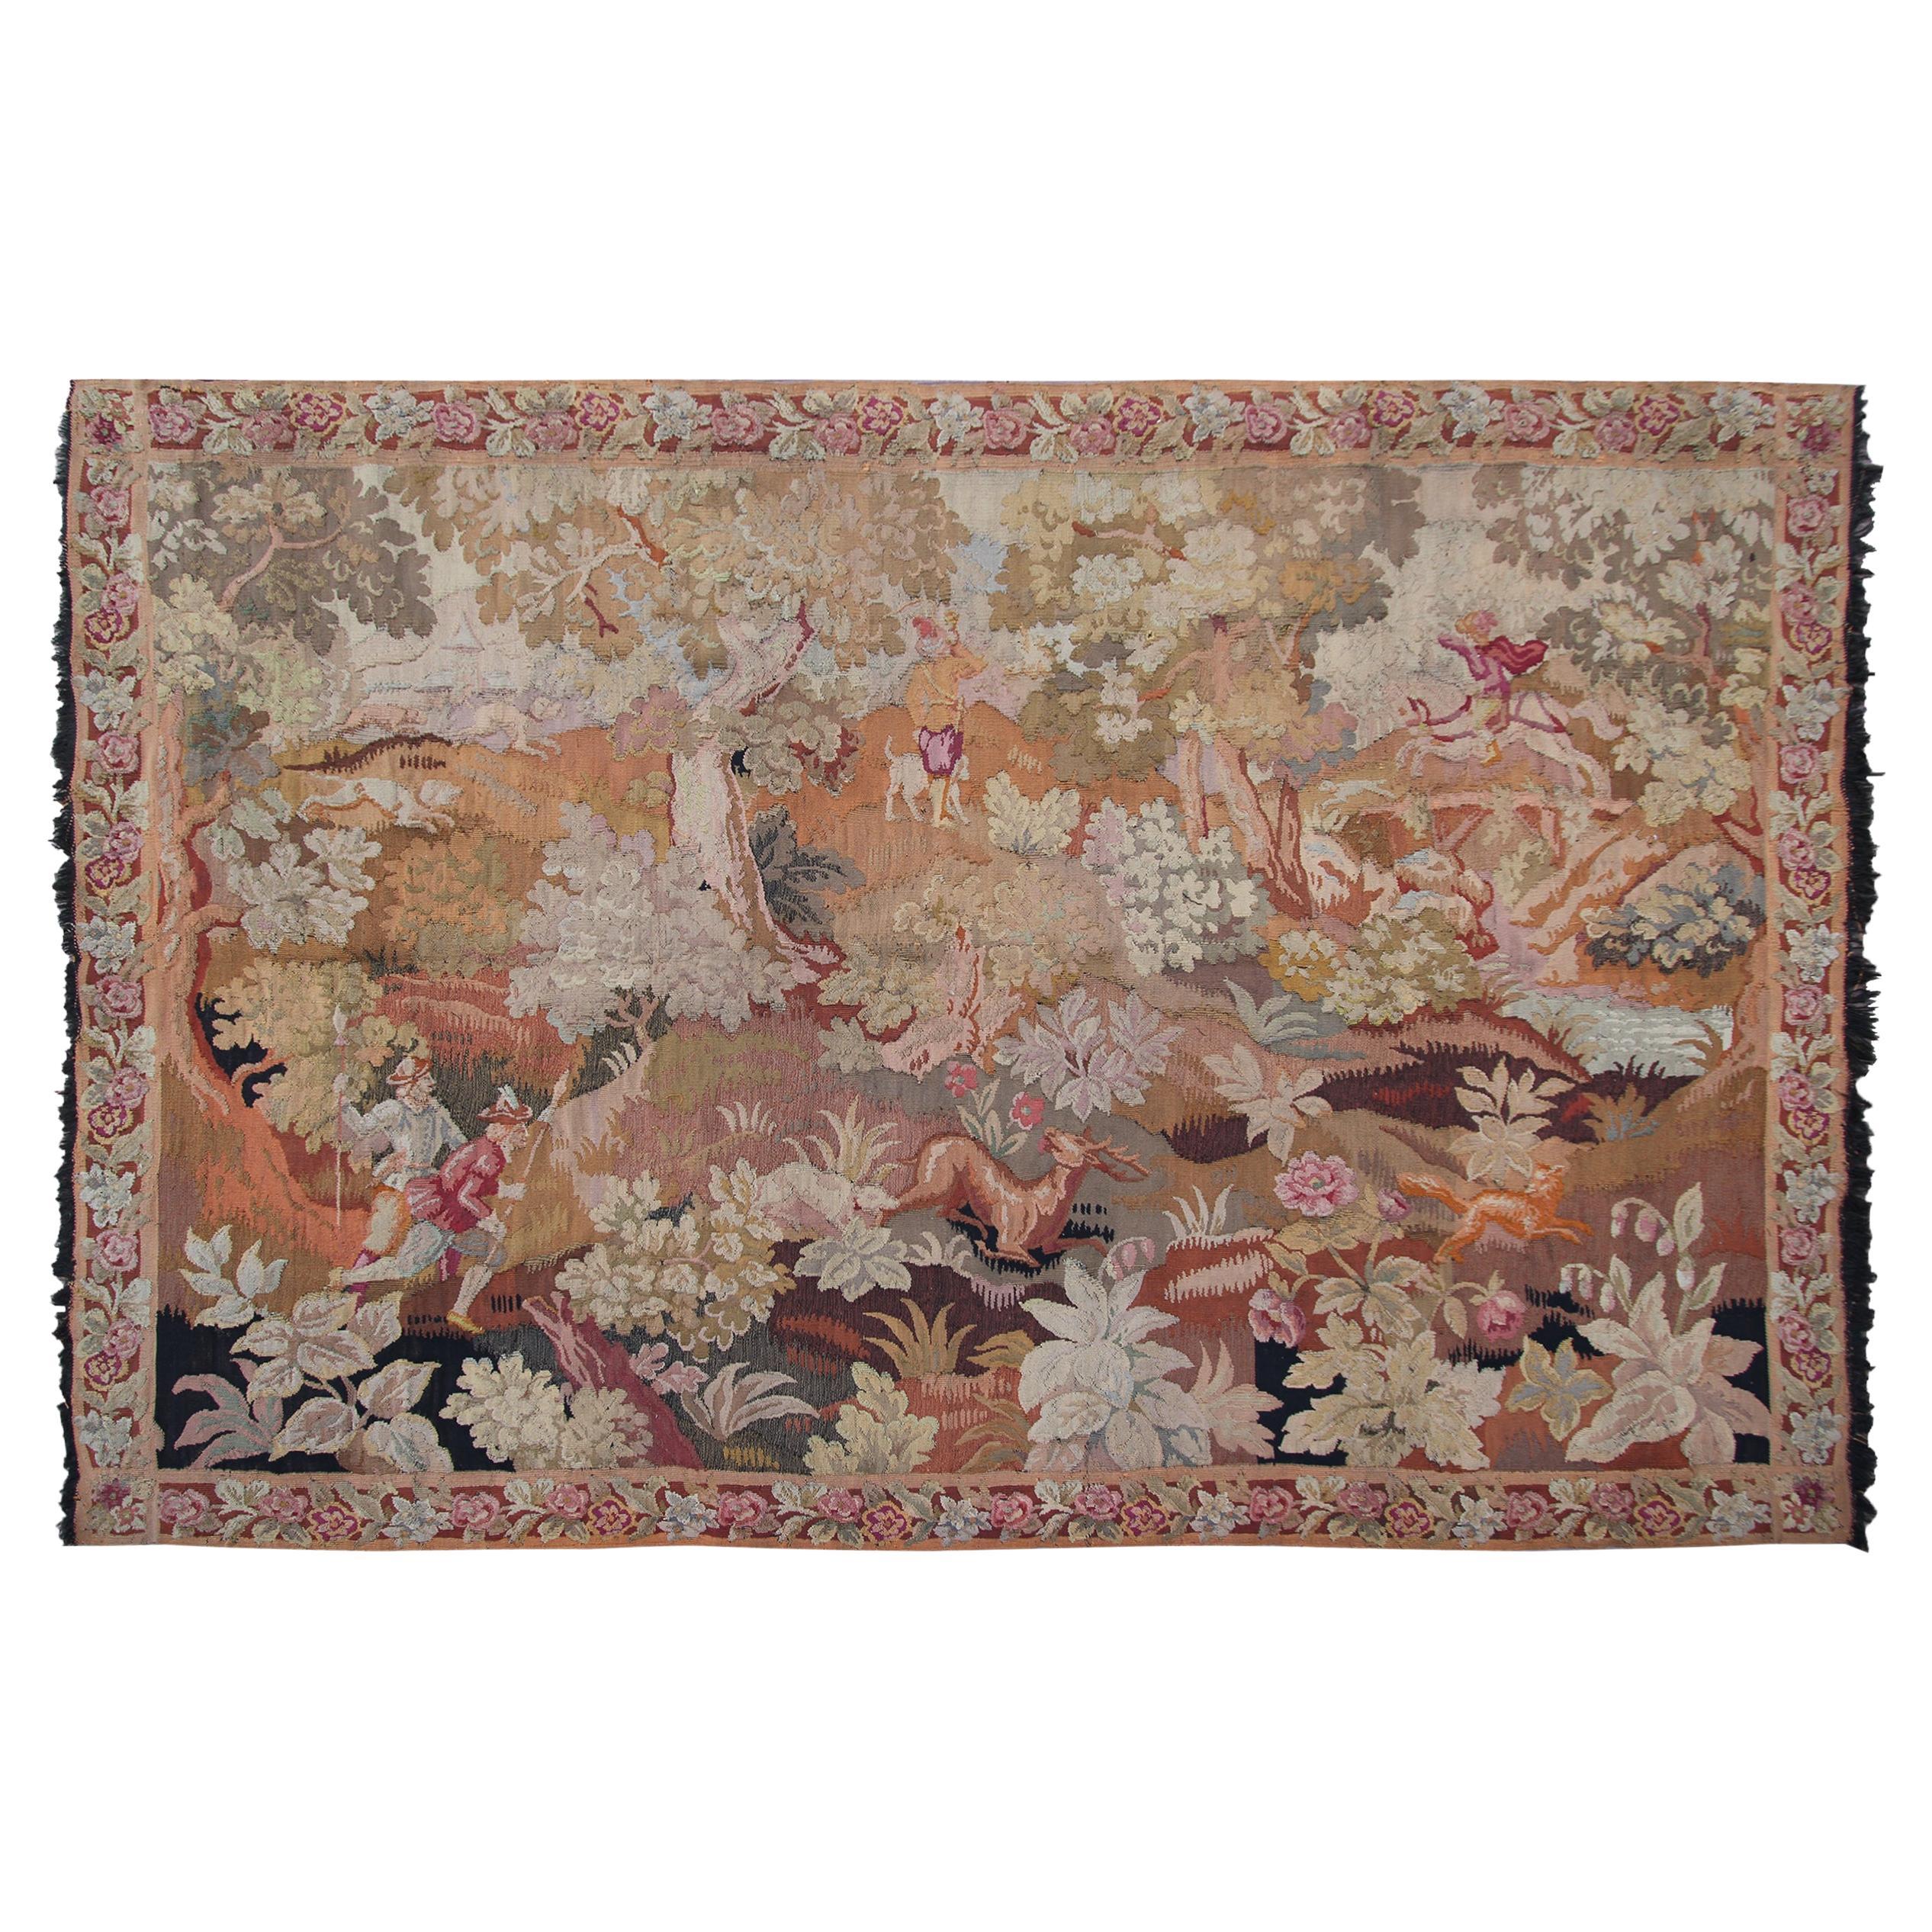 Antique Tapestry Antique French Tapestry Large Tapestry Verdure Tapestry, 1920